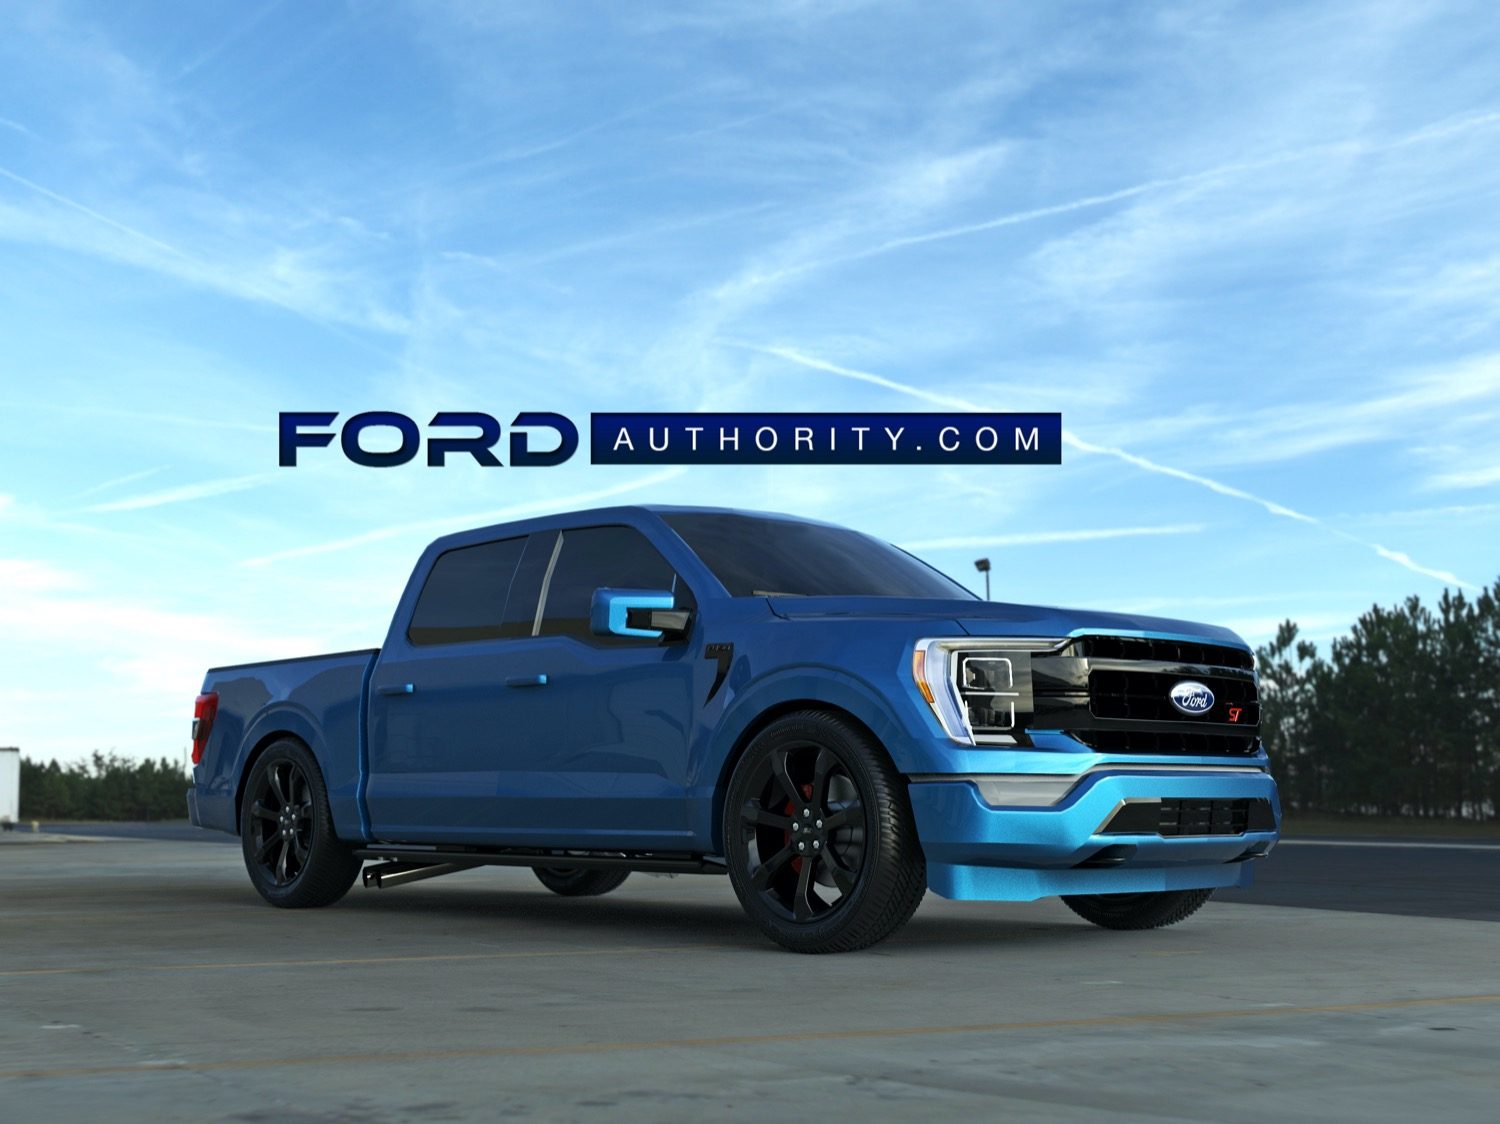 Is Ford Working On A High-Performance Ford F-150 Lightning Truck